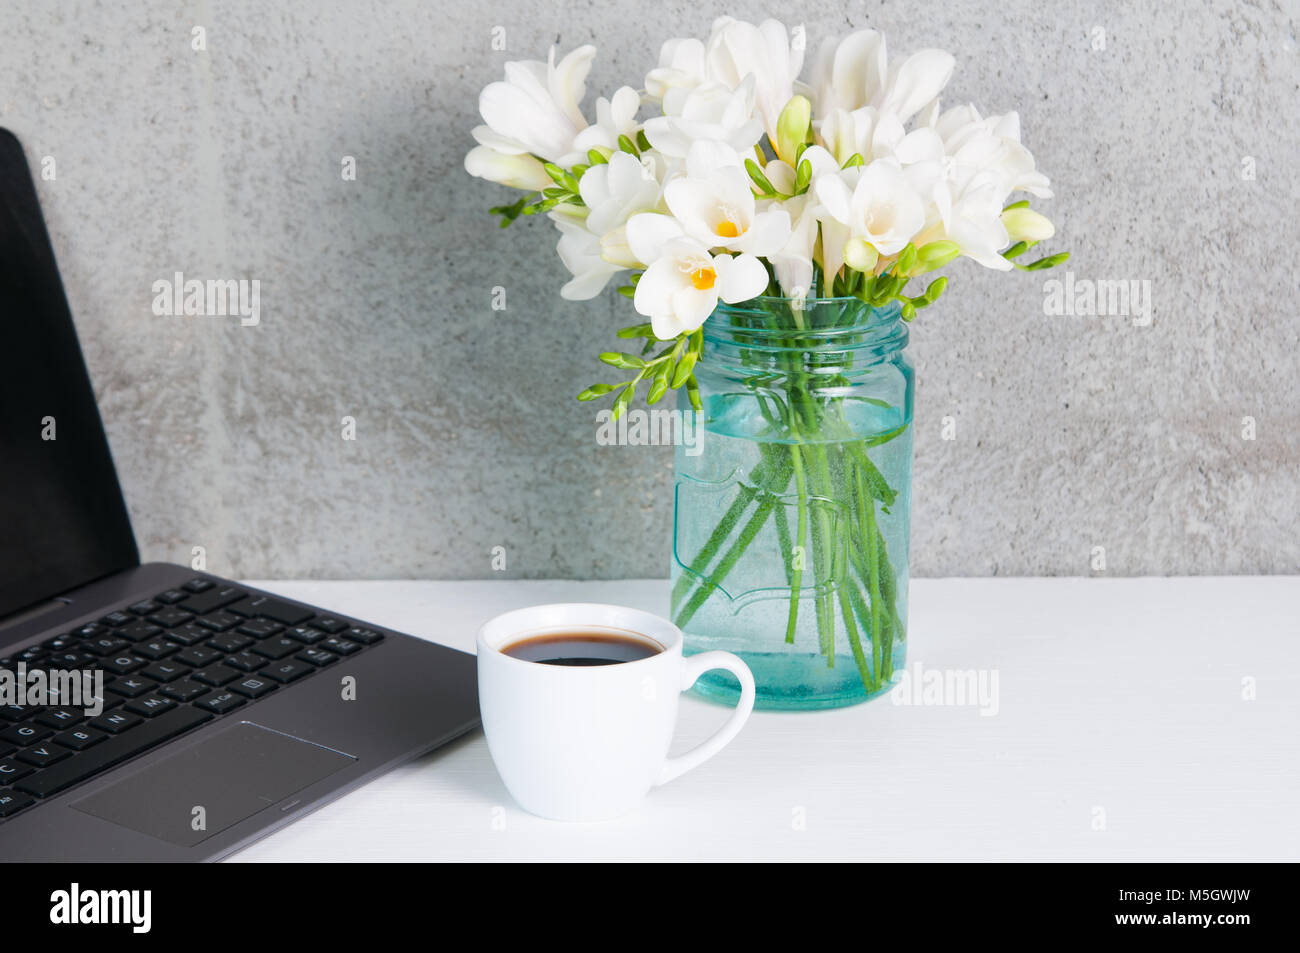 contemporary desk top with computer, flowers and a cup of coffee Stock Photo